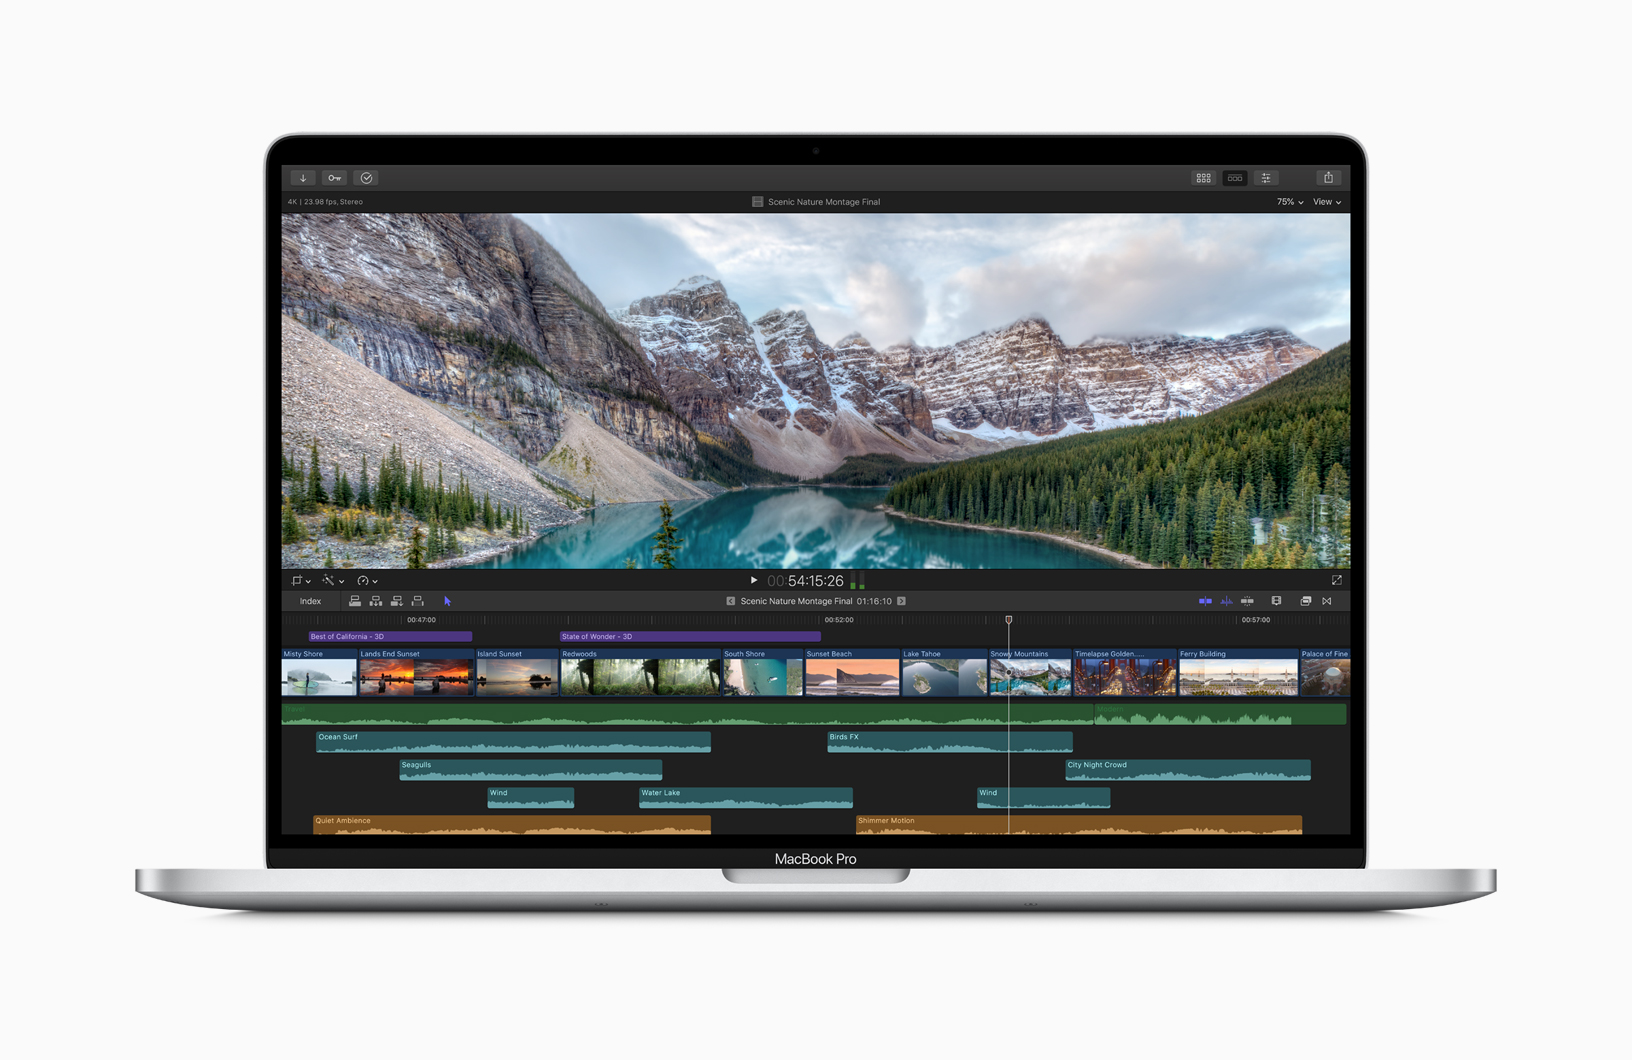 processor for gaming video and photo editing for mac mde by amd